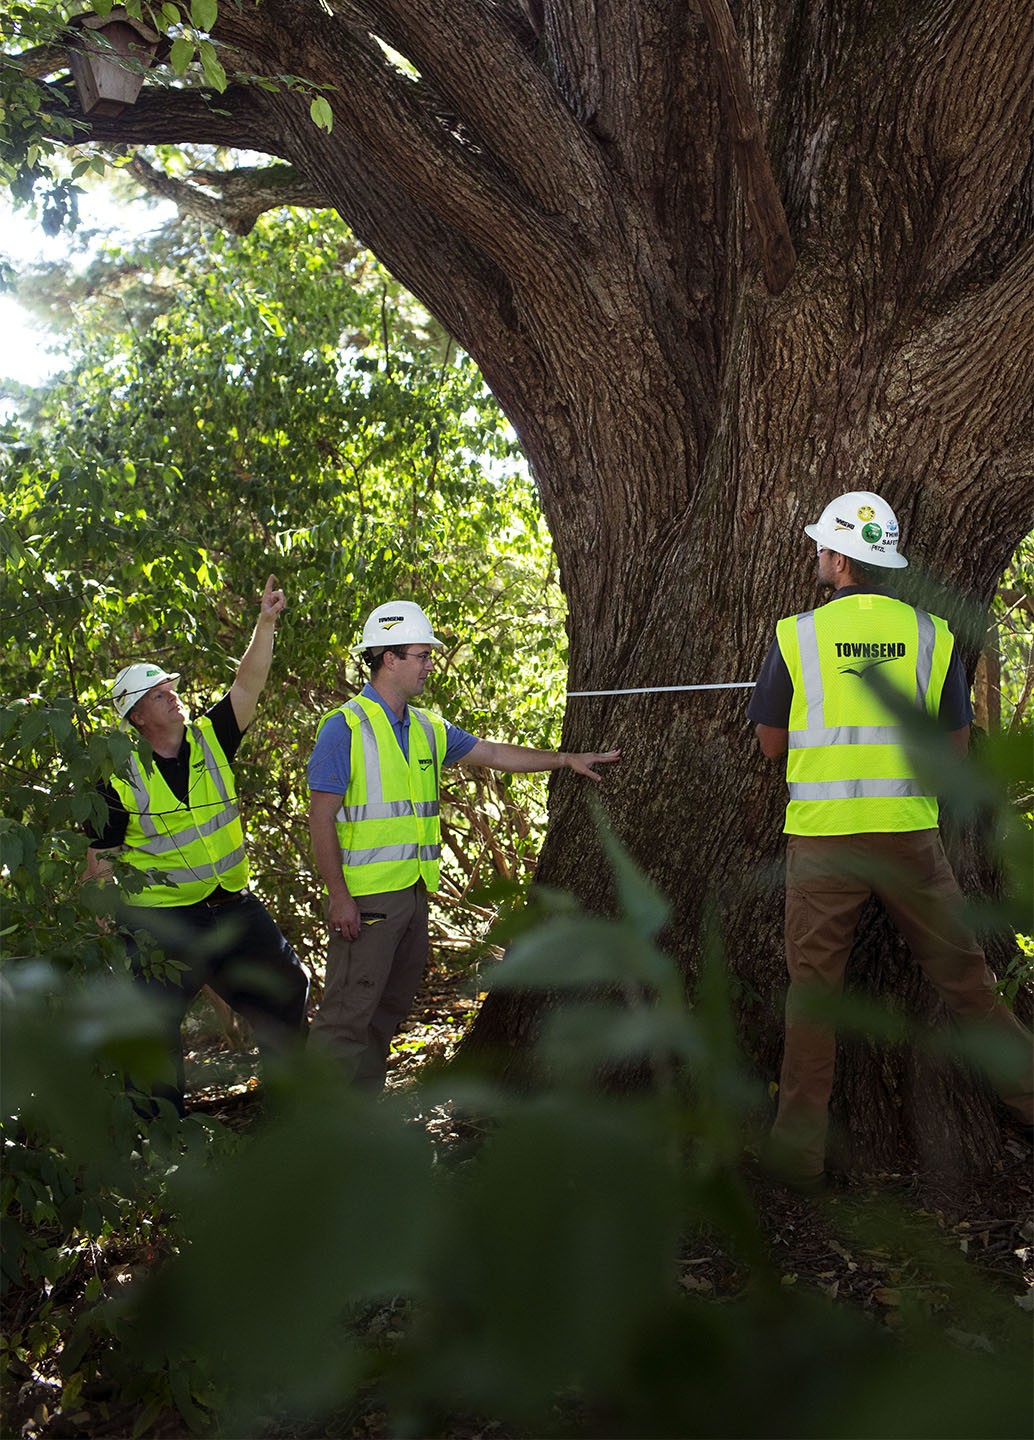 Comprehensive tree care services from qualified experts available now from Townsend Arborcare.